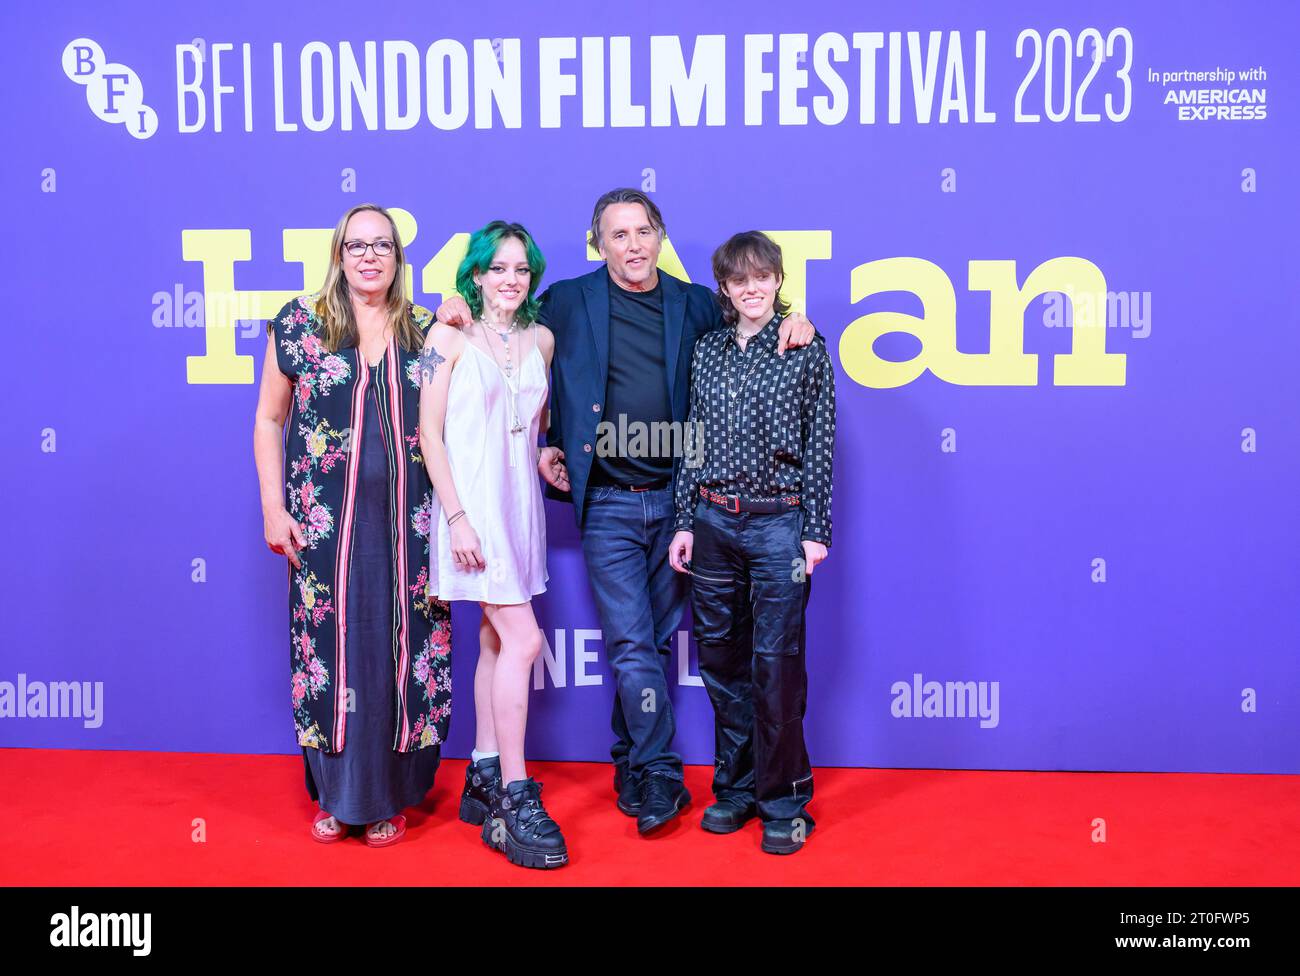 London, UK. 06th Oct, 2023. Richard Linklater, Director, with his wife Christina Harrison and two of his children. Red carpet arrivals for the showing of 'Hit Man' at the Southbank Centre, Royal Festival Hall during the BFI London Film Festival, London, UK. Credit: LFP/Alamy Live News Stock Photo